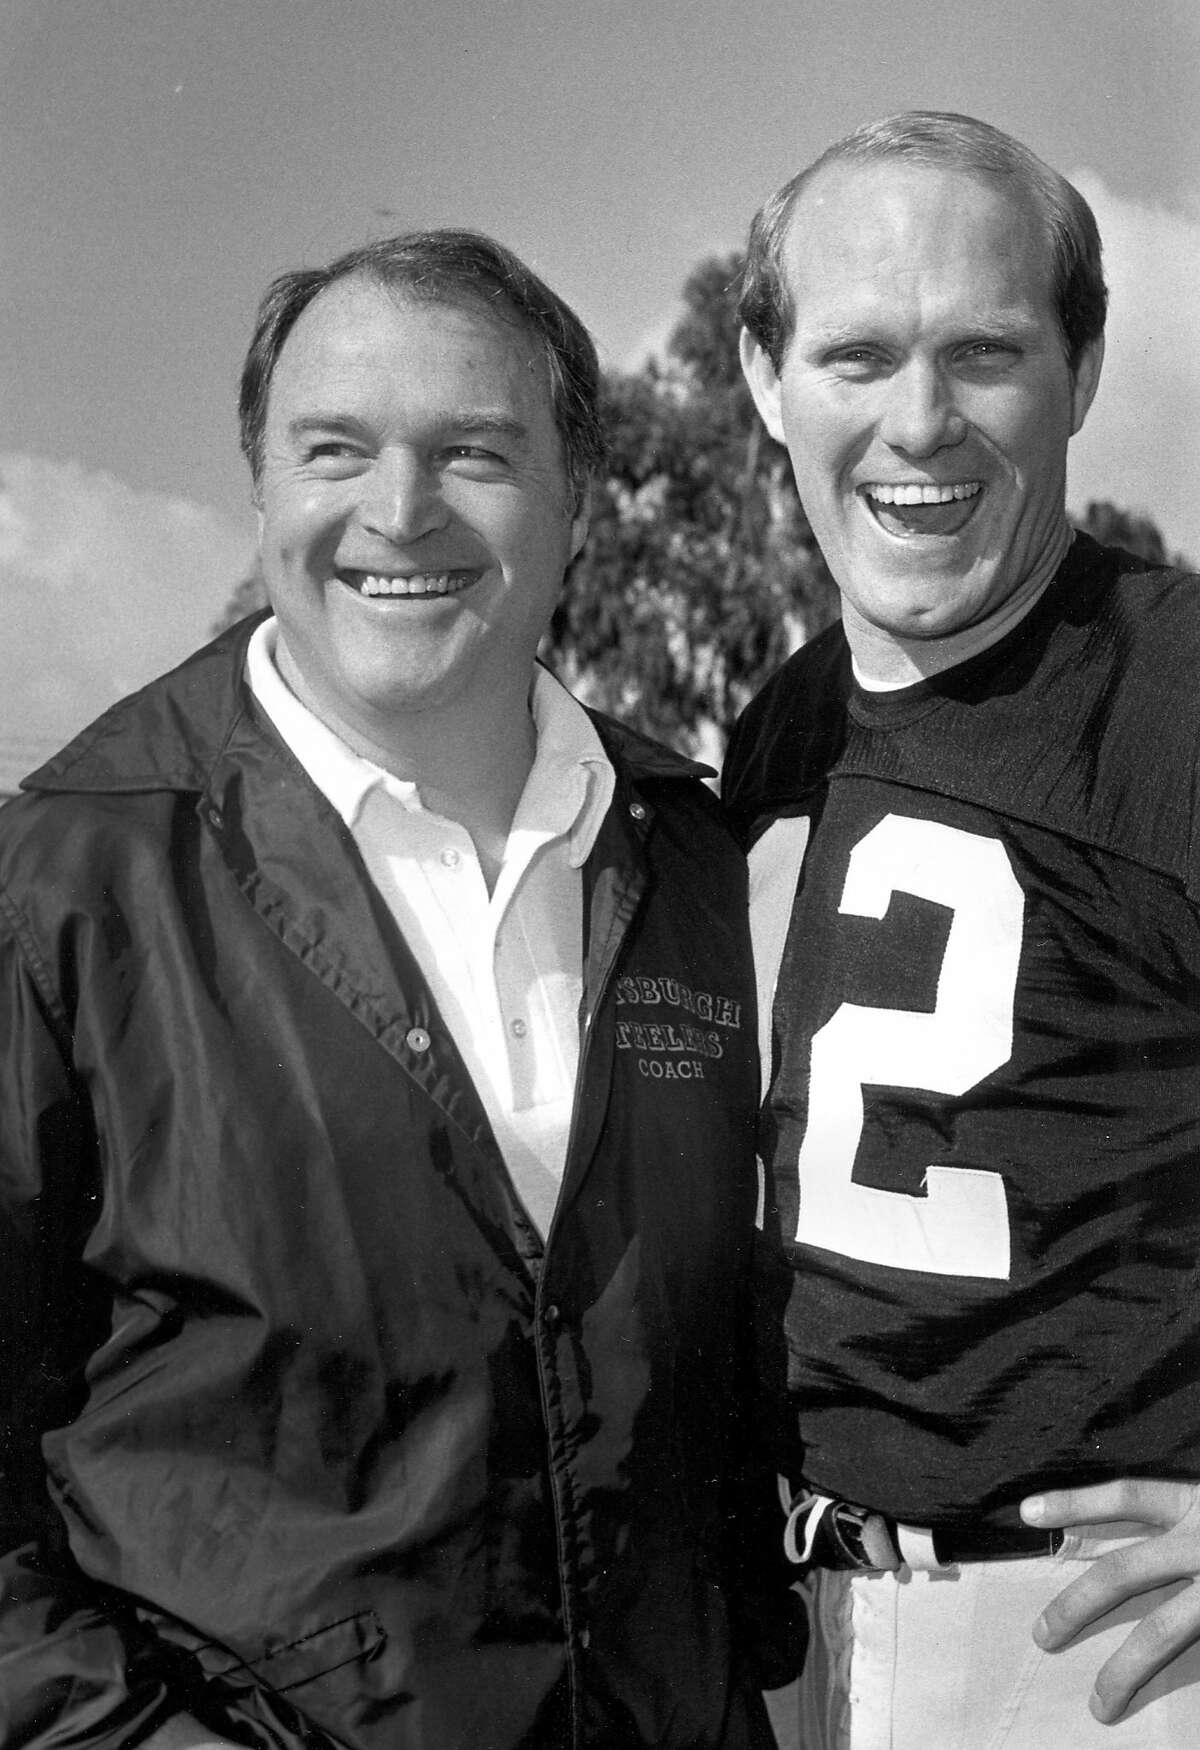 Hall of Fame Steelers coach Chuck Noll dies at 82